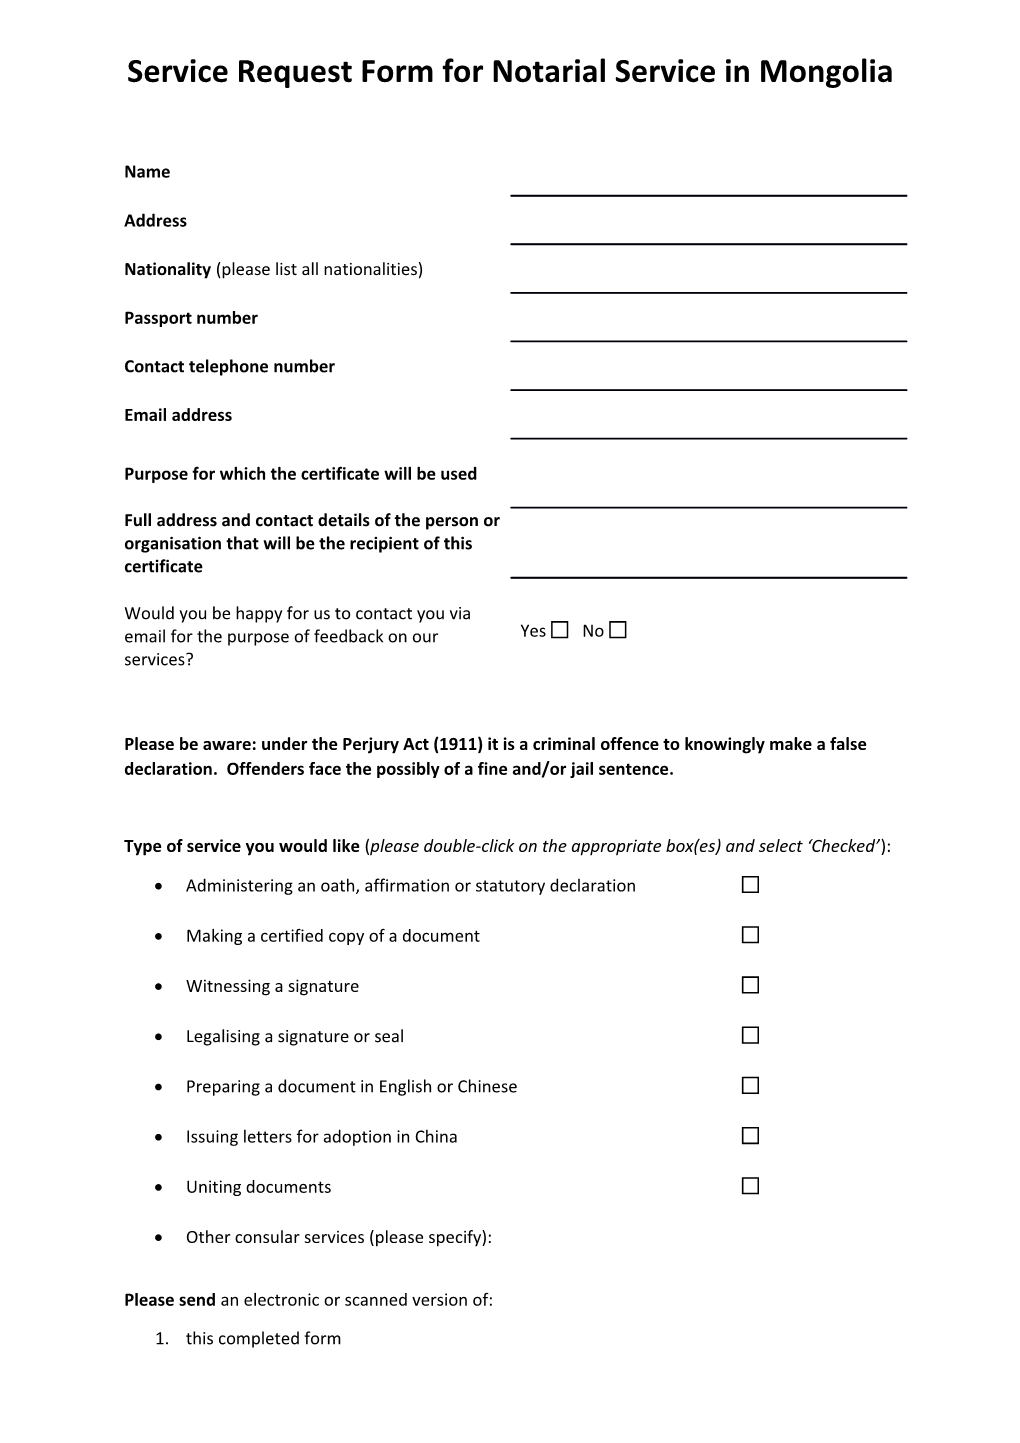 Service Request Form s1